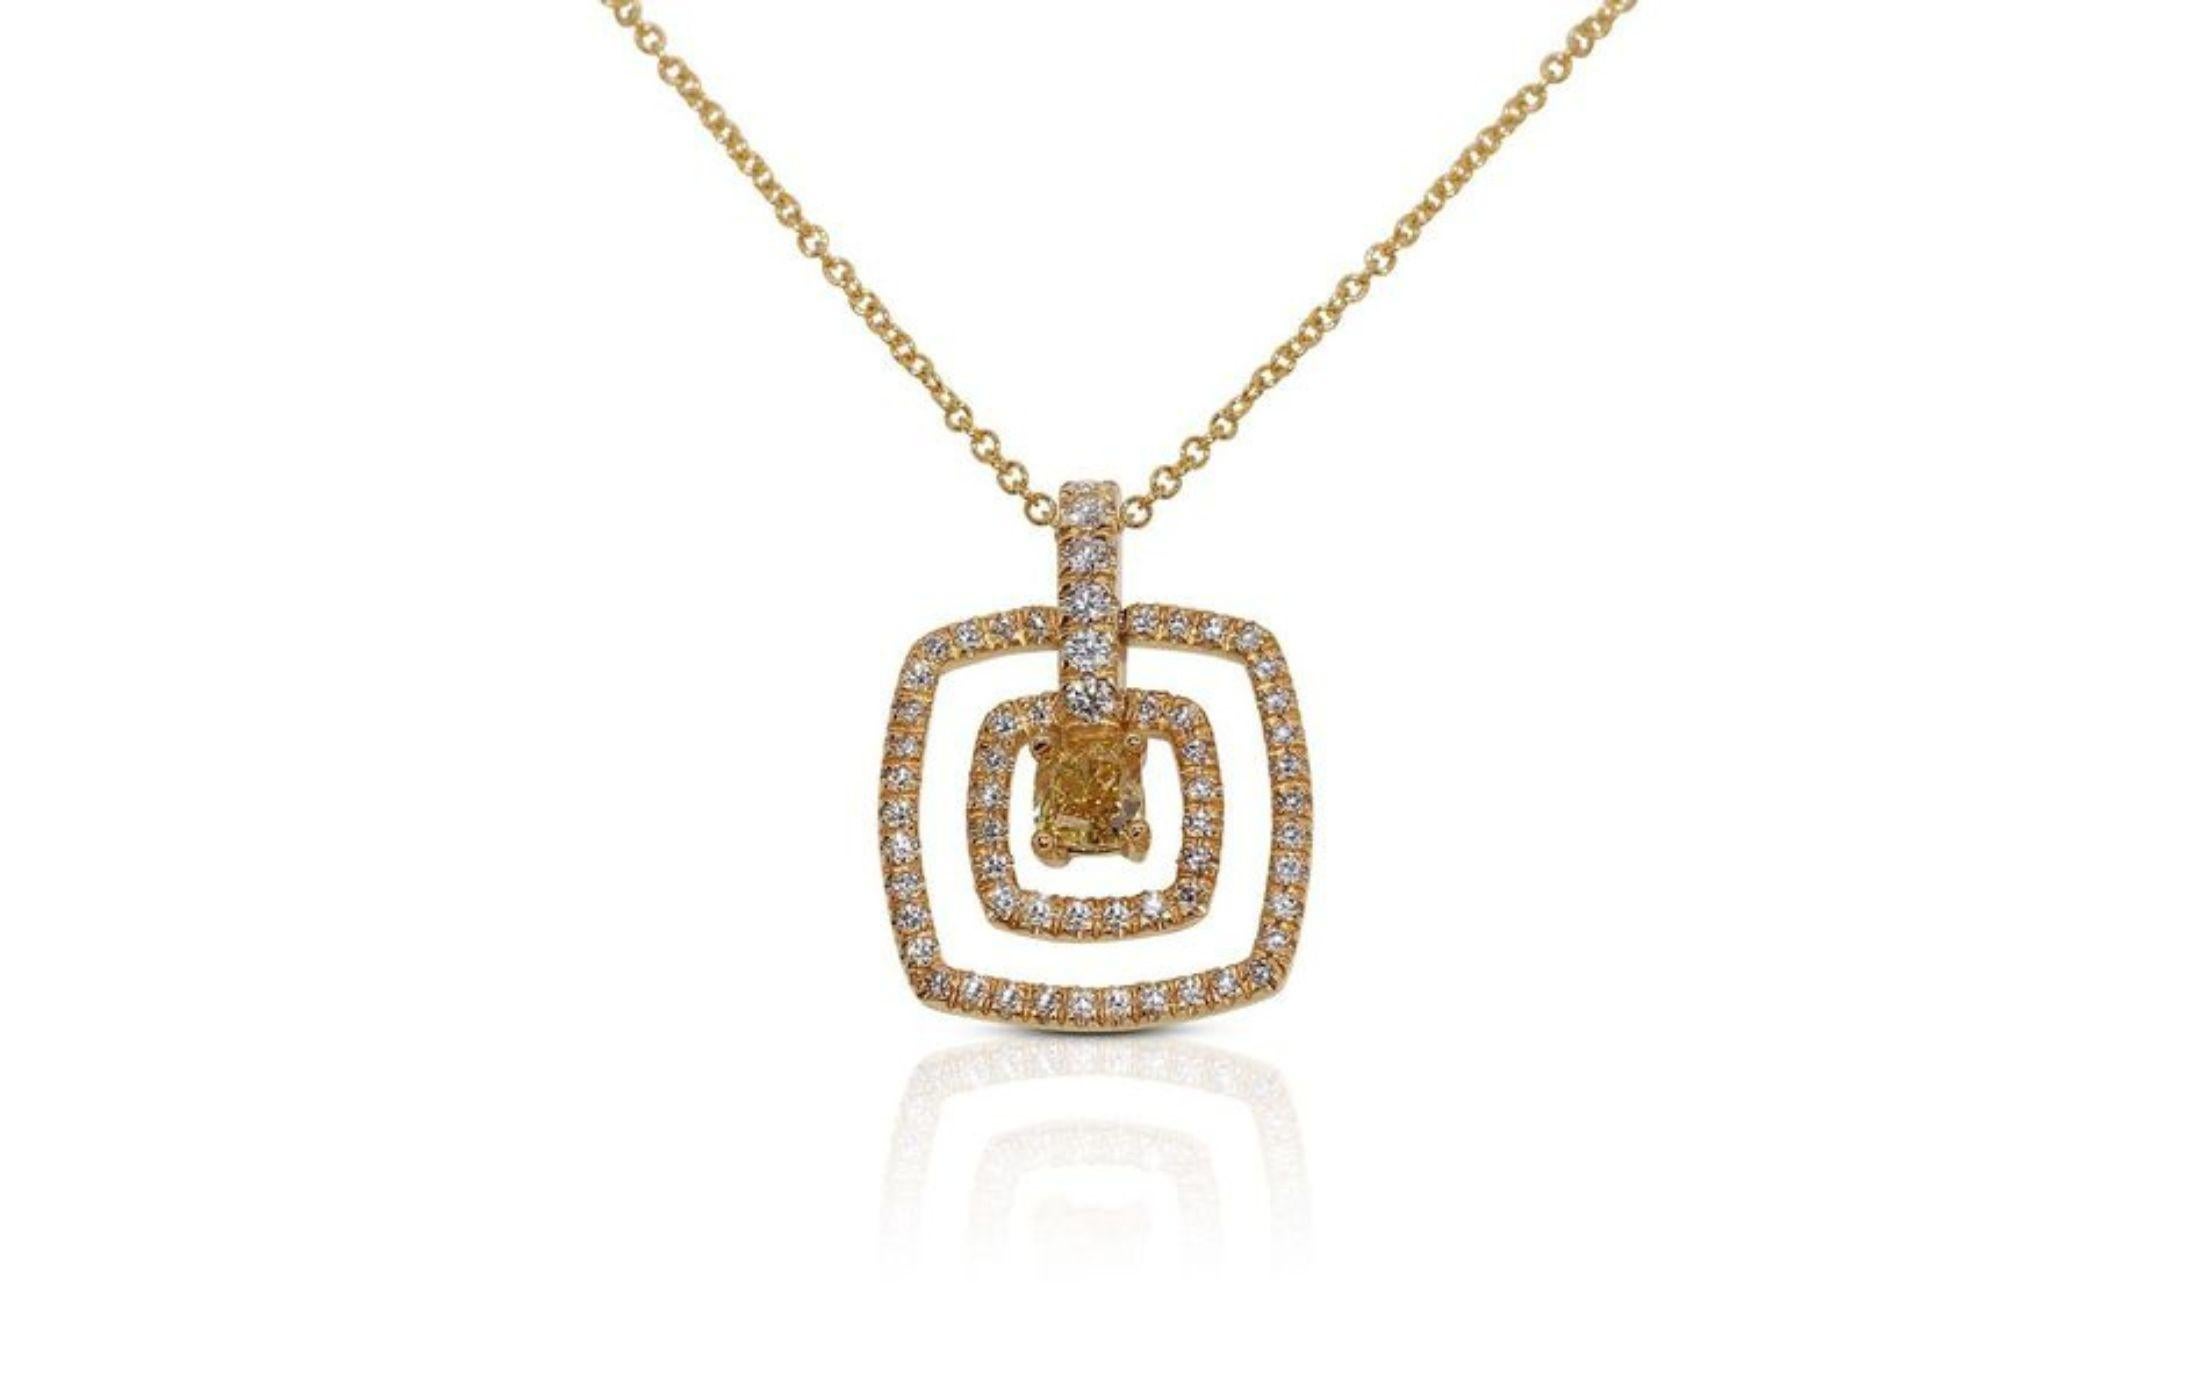 The necklace chain, crafted from radiant 18K yellow gold, adds a warm and luxurious touch to the piece. The intricate detailing of the goldwork enhances the overall design, creating a seamless and delicate flow that complements the brilliance of the